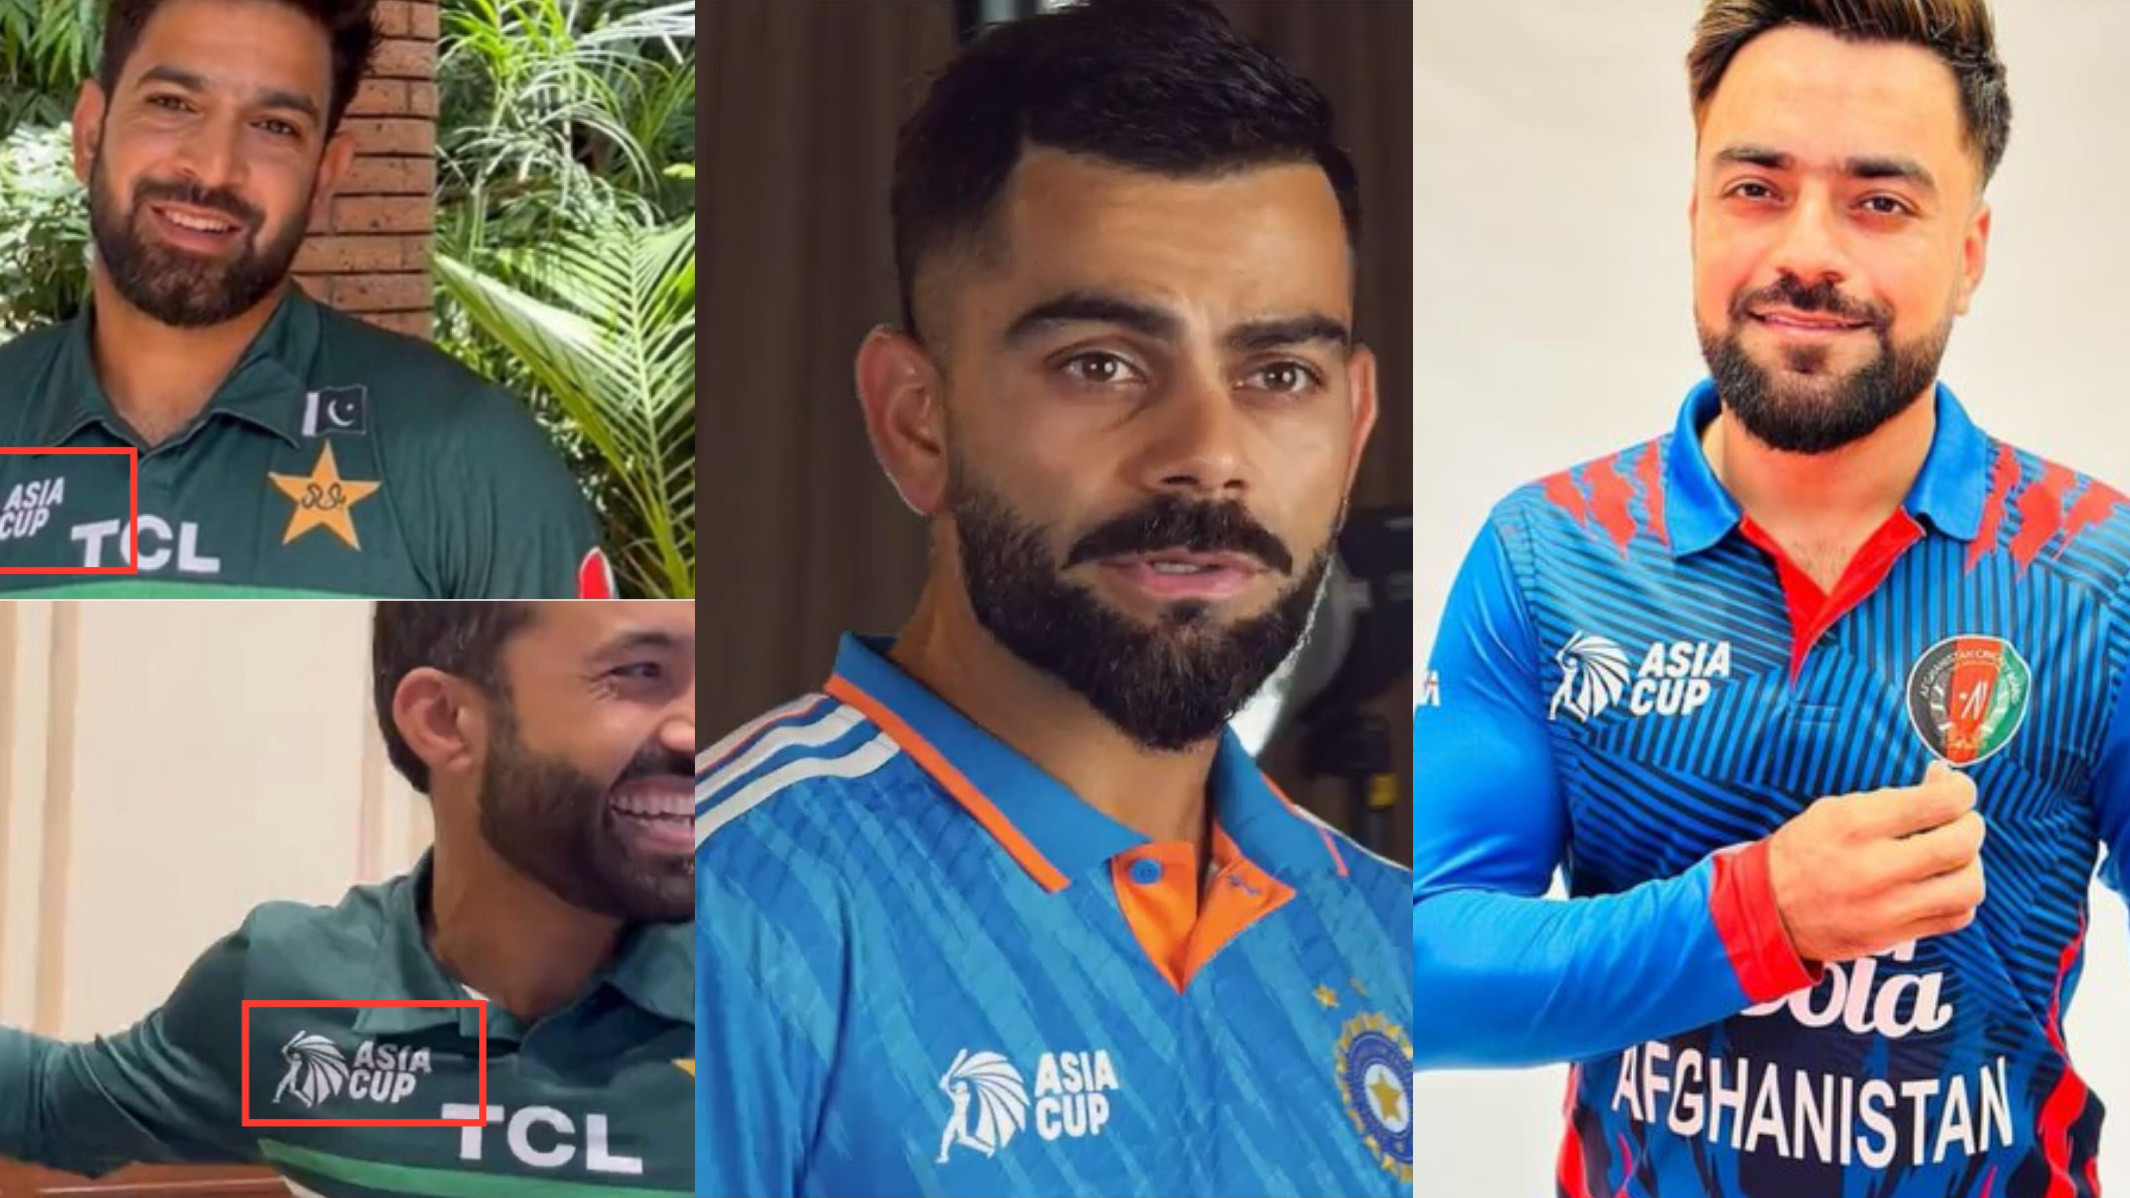 Asia Cup 2023: Former Pakistani players slam PCB and ACC after host nation’s name goes missing from teams' jerseys